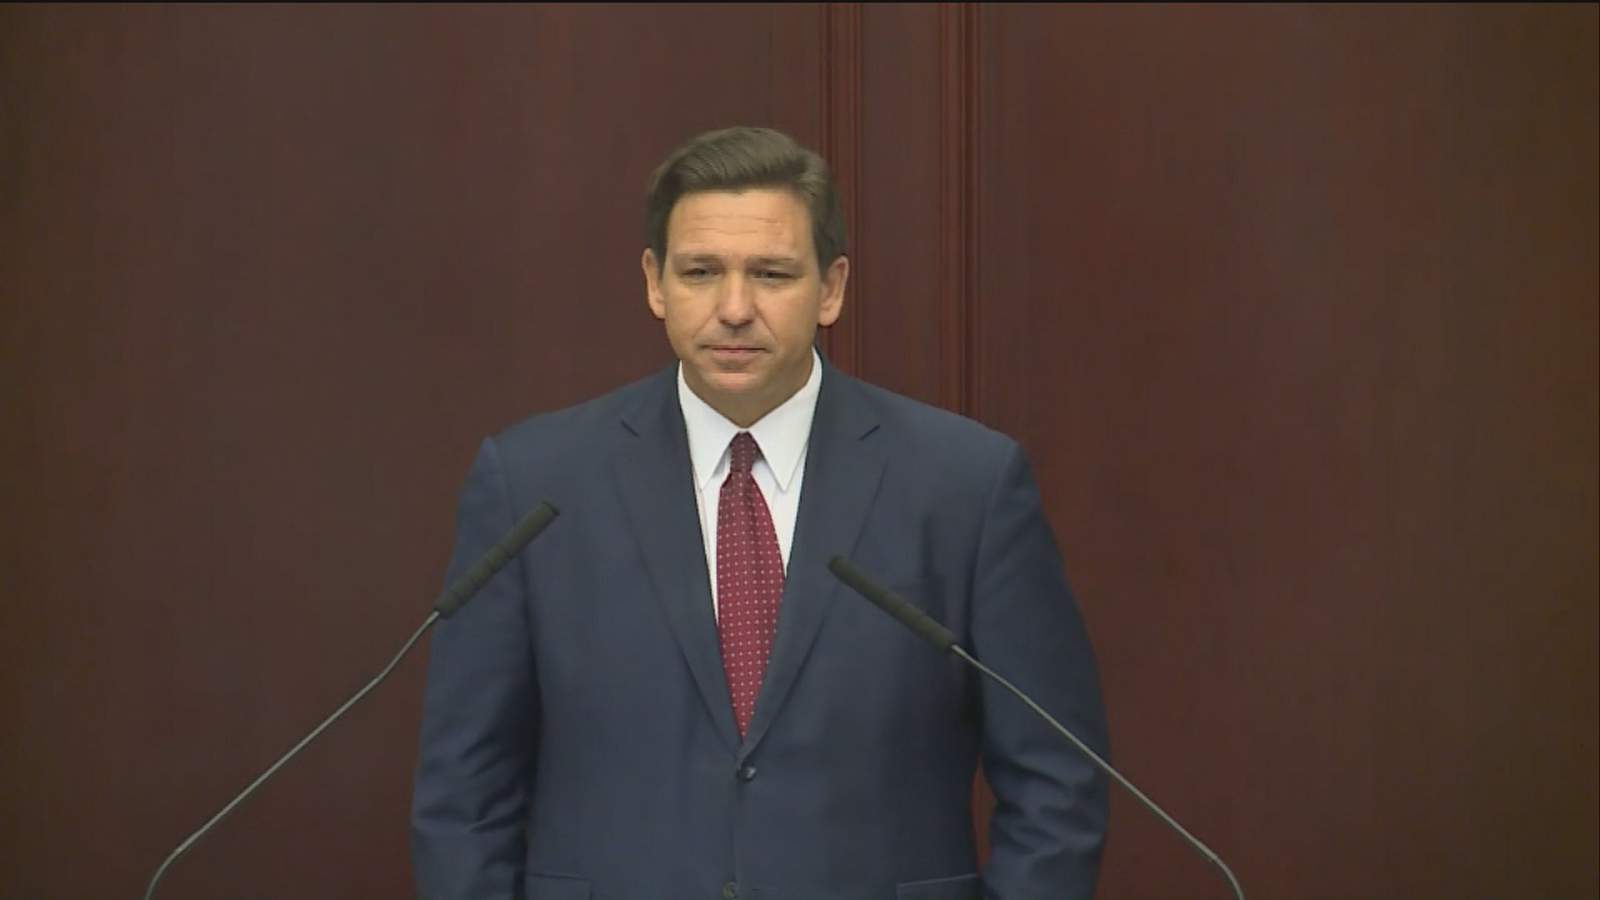 Majority of Florida voters approve of Ron DeSantis’ performance as governor, poll shows